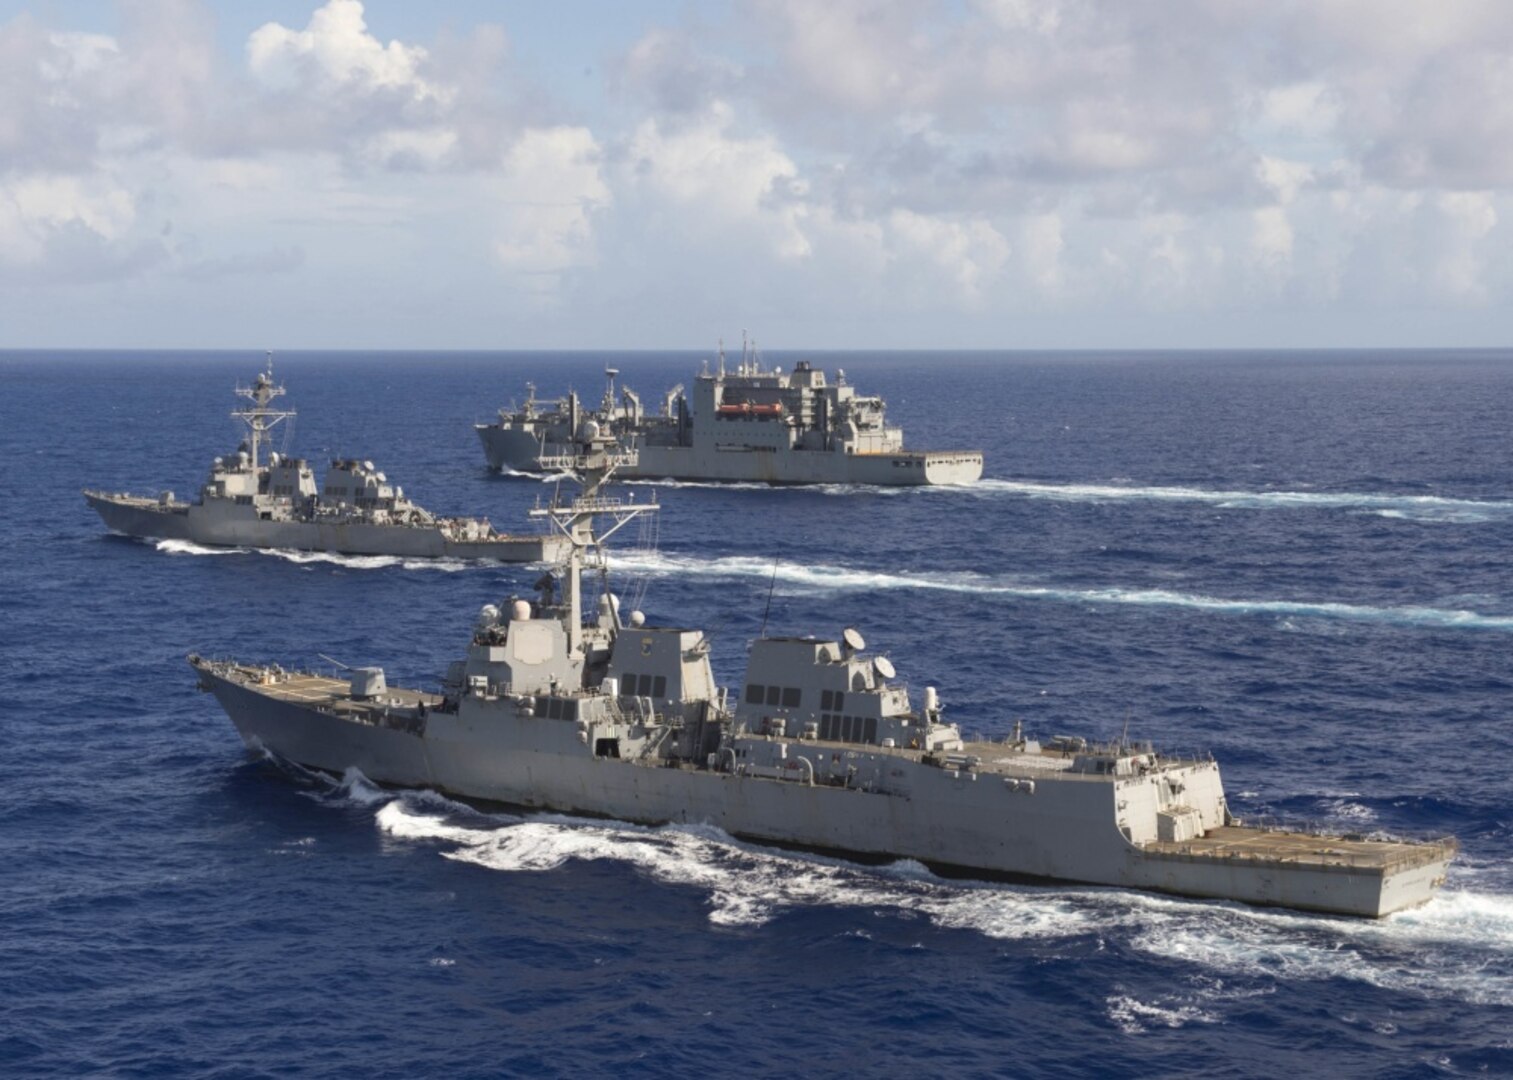 The guided-missile destroyers USS Spruance, front, USS Decatur and the Military Sealift Command fleet oiler USNS Carl Brashear steam in formation in the Pacific Ocean with the U.S. Air Force 34th Expeditionary Bomb Squadron from Anderson Air Force Base, Guam, following a joint exercise, Oct. 27, 2016. The Spruance and Decatur and the guided-missile destroyer USS Momsen, along with embarked “Warbirds” and “Devilfish” detachments of Helicopter Maritime Strike Squadron 49, are deployed in support of maritime security and stability in the Indo-Asia-Pacific region as part of a U.S. 3rd Fleet Pacific Surface Action Group under the commander of Destroyer Squadron 31. Navy photo by Petty Officer 2nd Class Will Gaskill